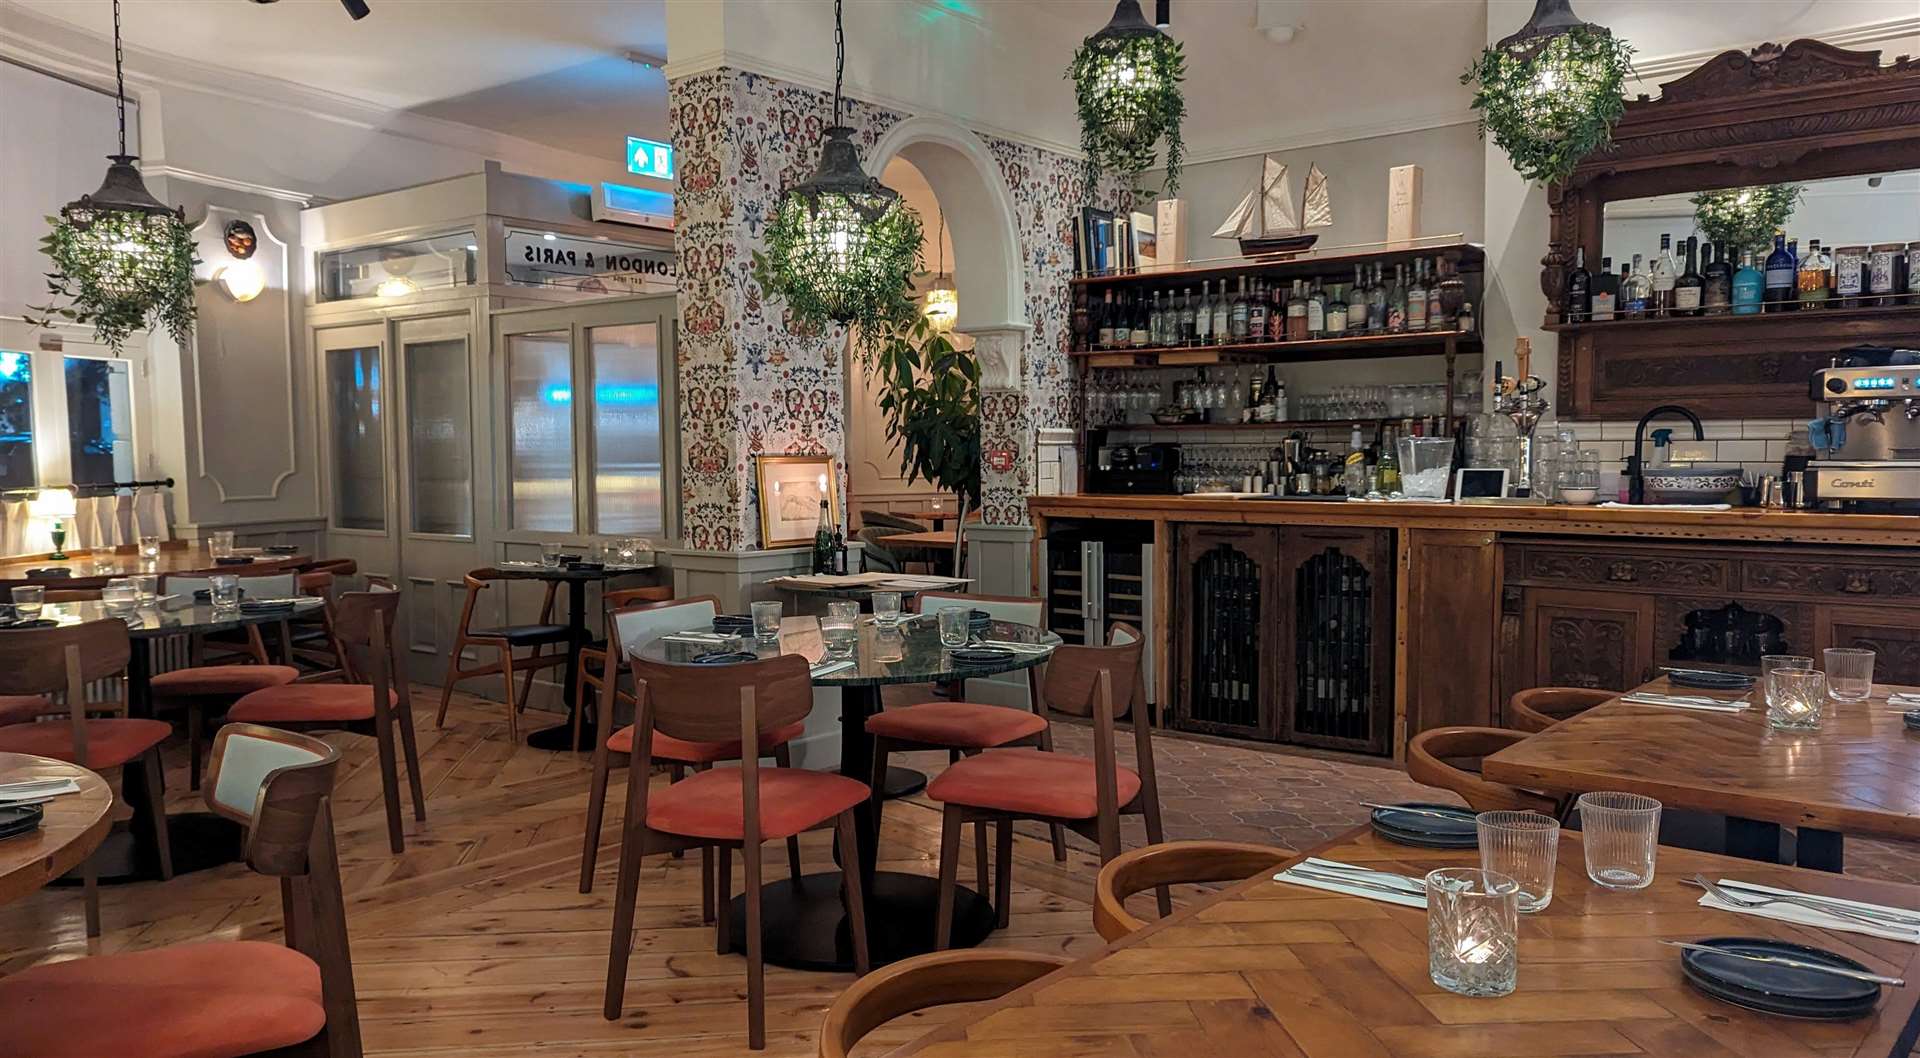 Inside the London and Paris seafood restaurant in Folkestone